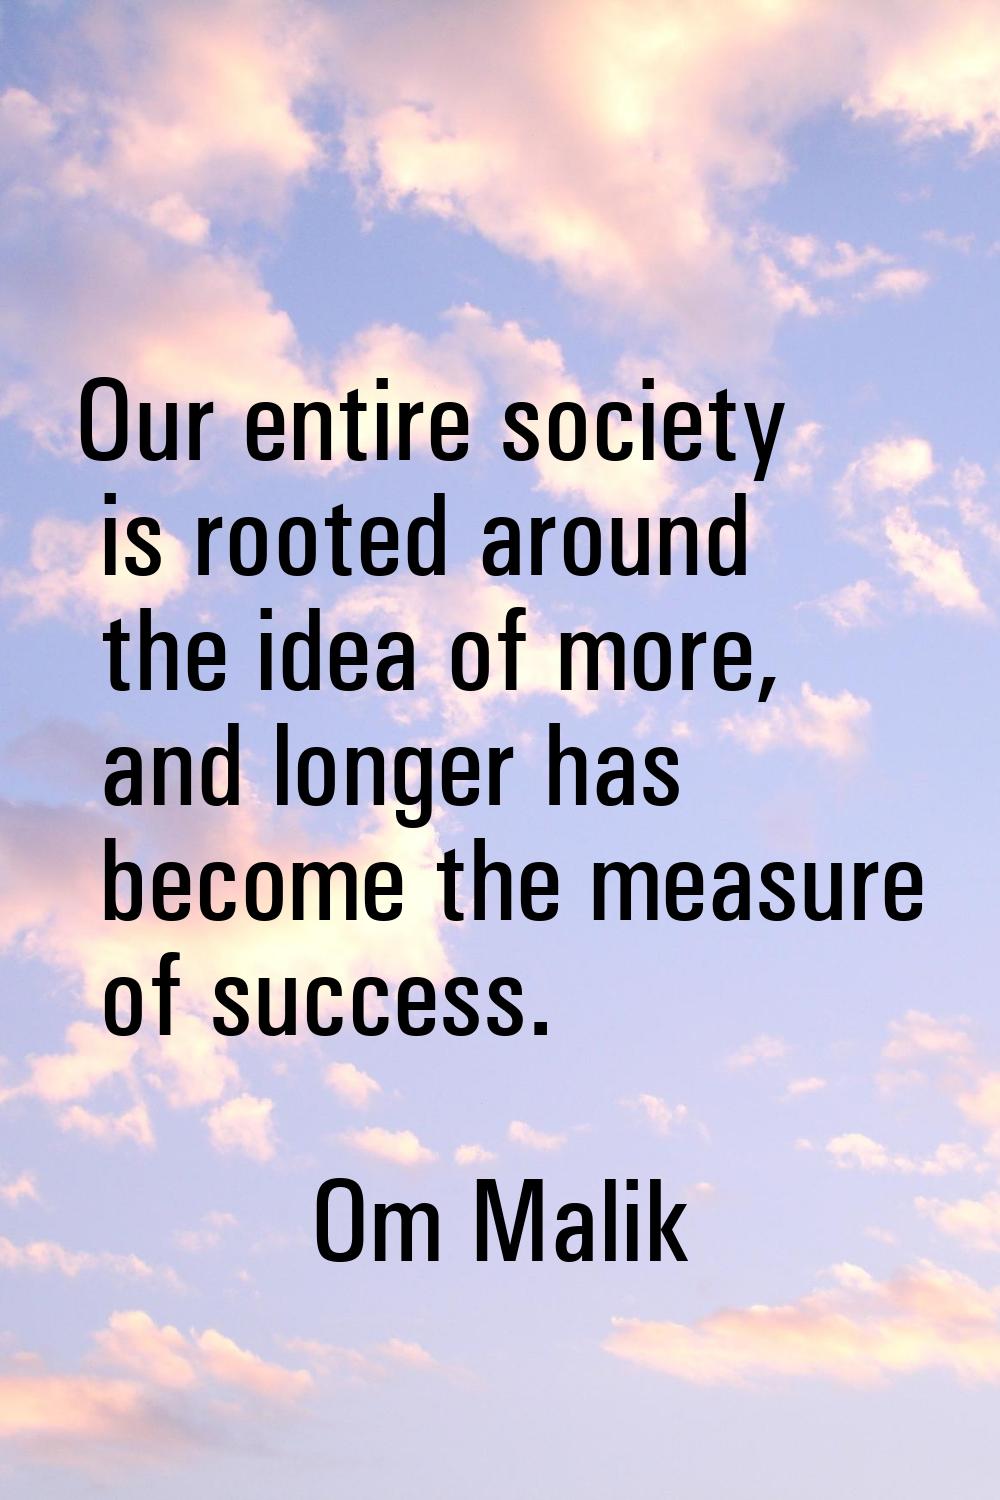 Our entire society is rooted around the idea of more, and longer has become the measure of success.